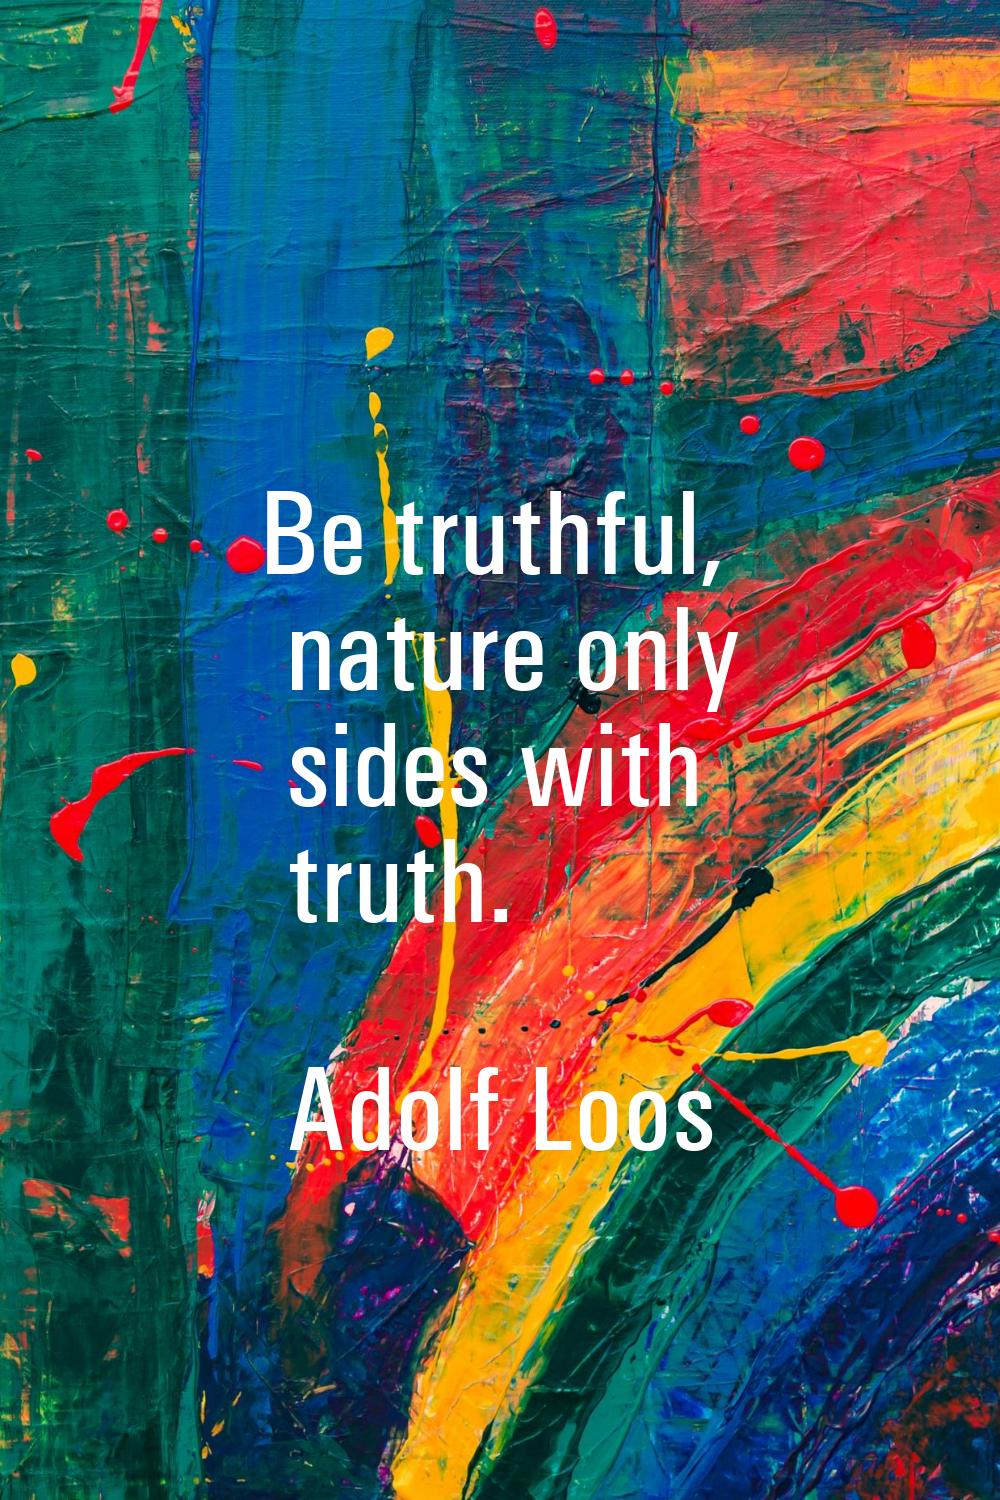 Be truthful, nature only sides with truth.